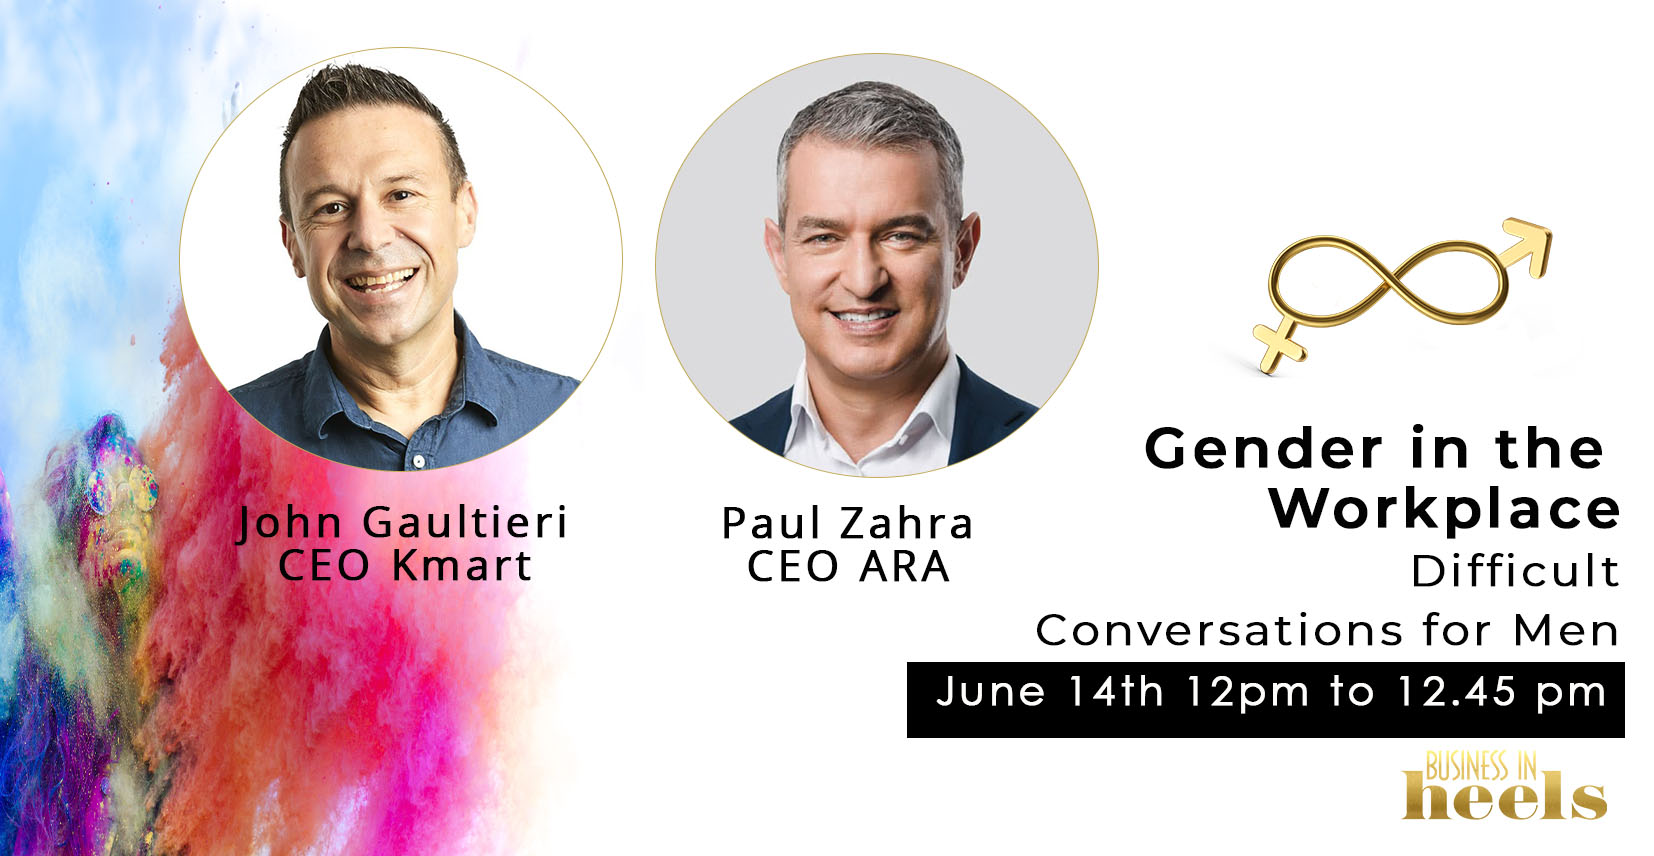 Gender in the Workplace: Difficult Conversations for Men with John Gaultieri & Paul Zahra